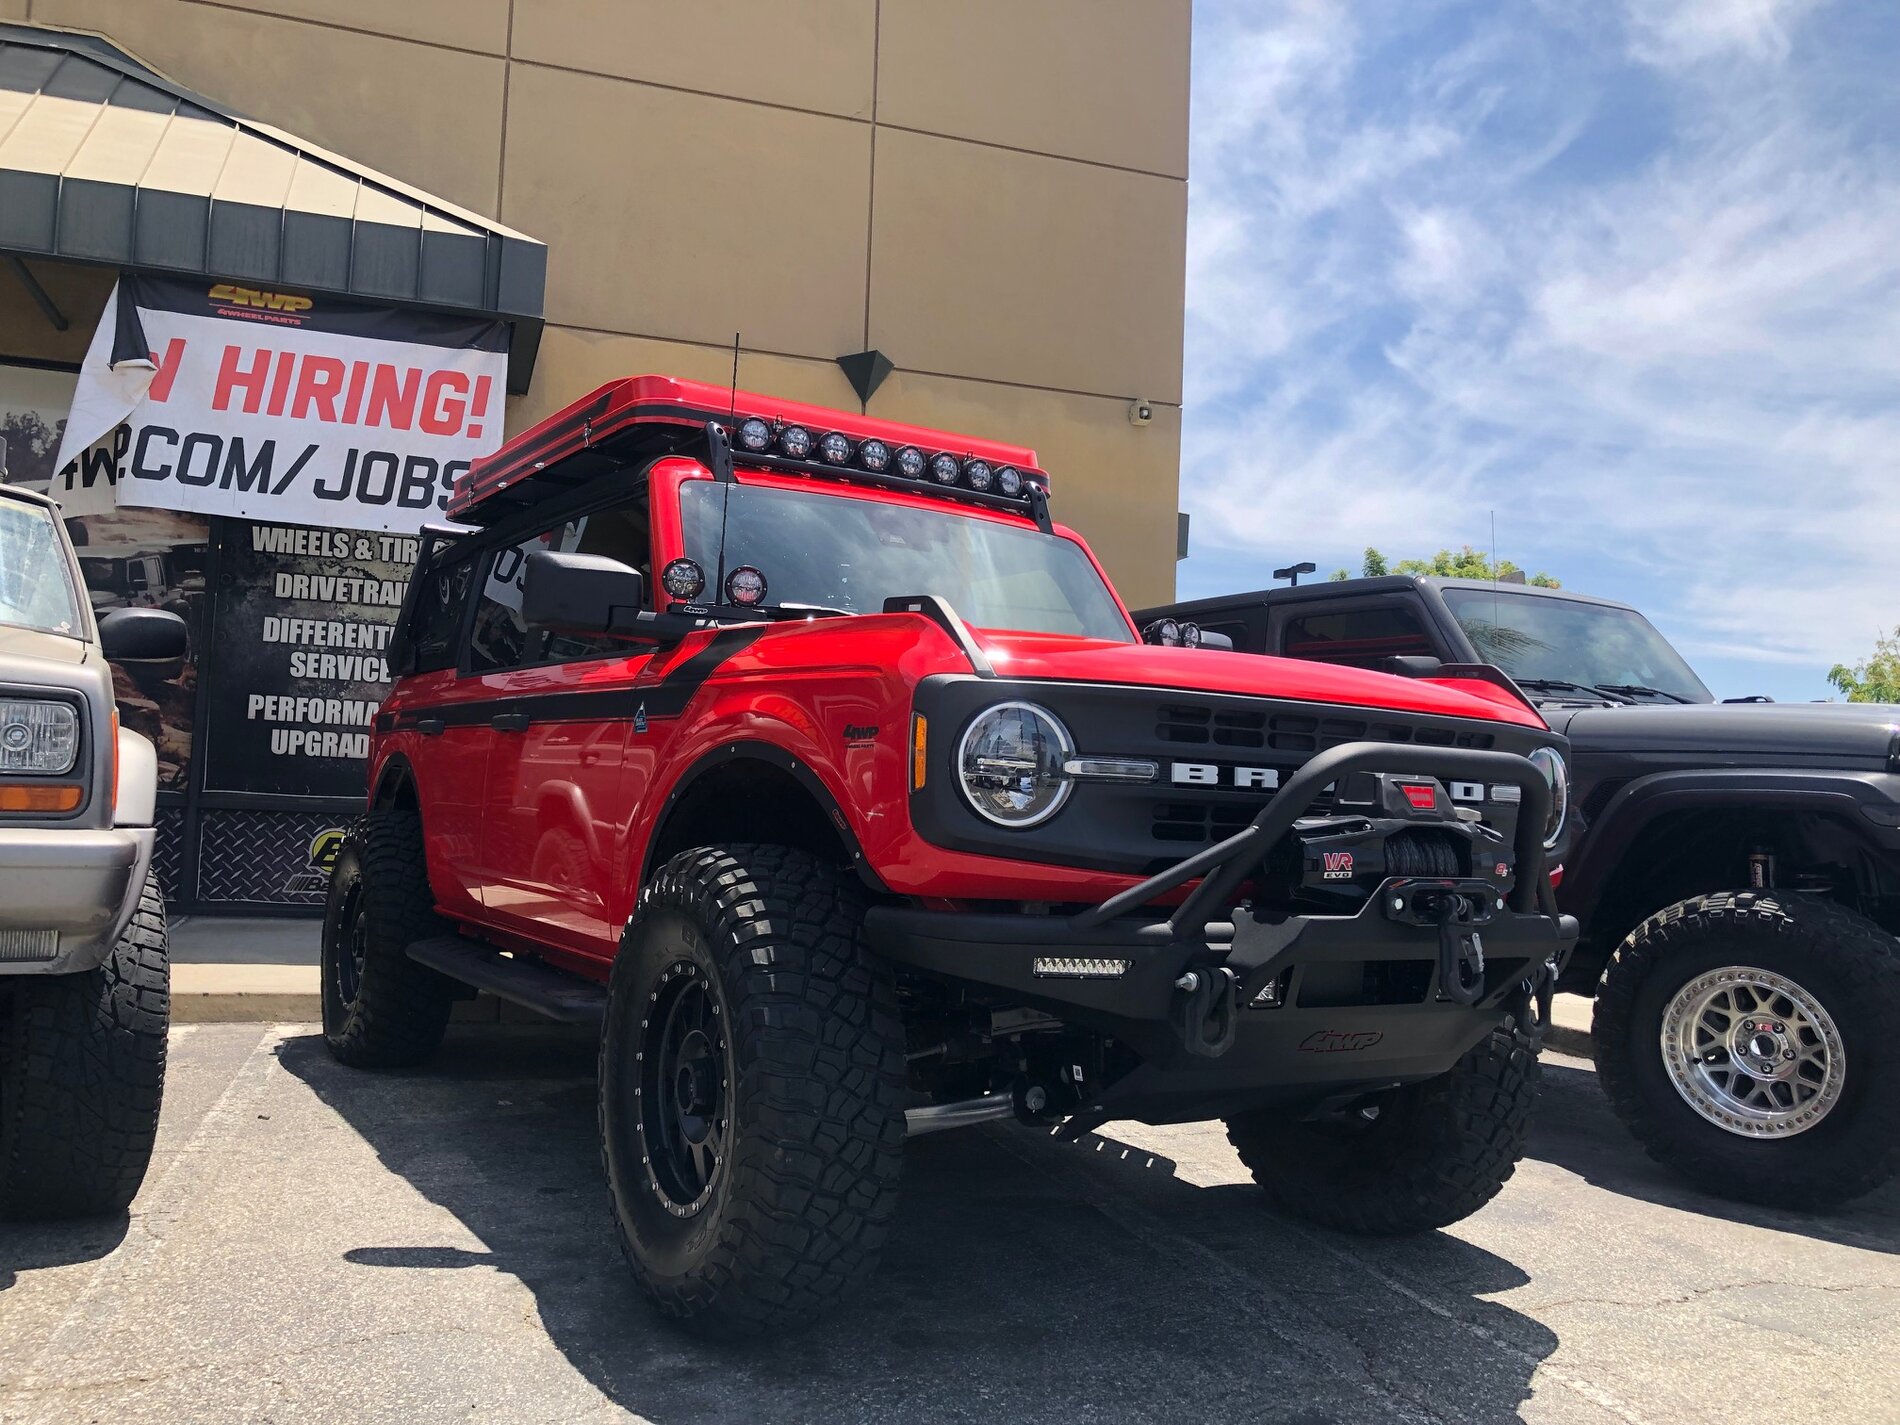 Ford Bronco 🔥🚨Update: Flash Display of the 4WPs Bronco: West Covina Noon to 2pm (Rest of locations in comments) B&B